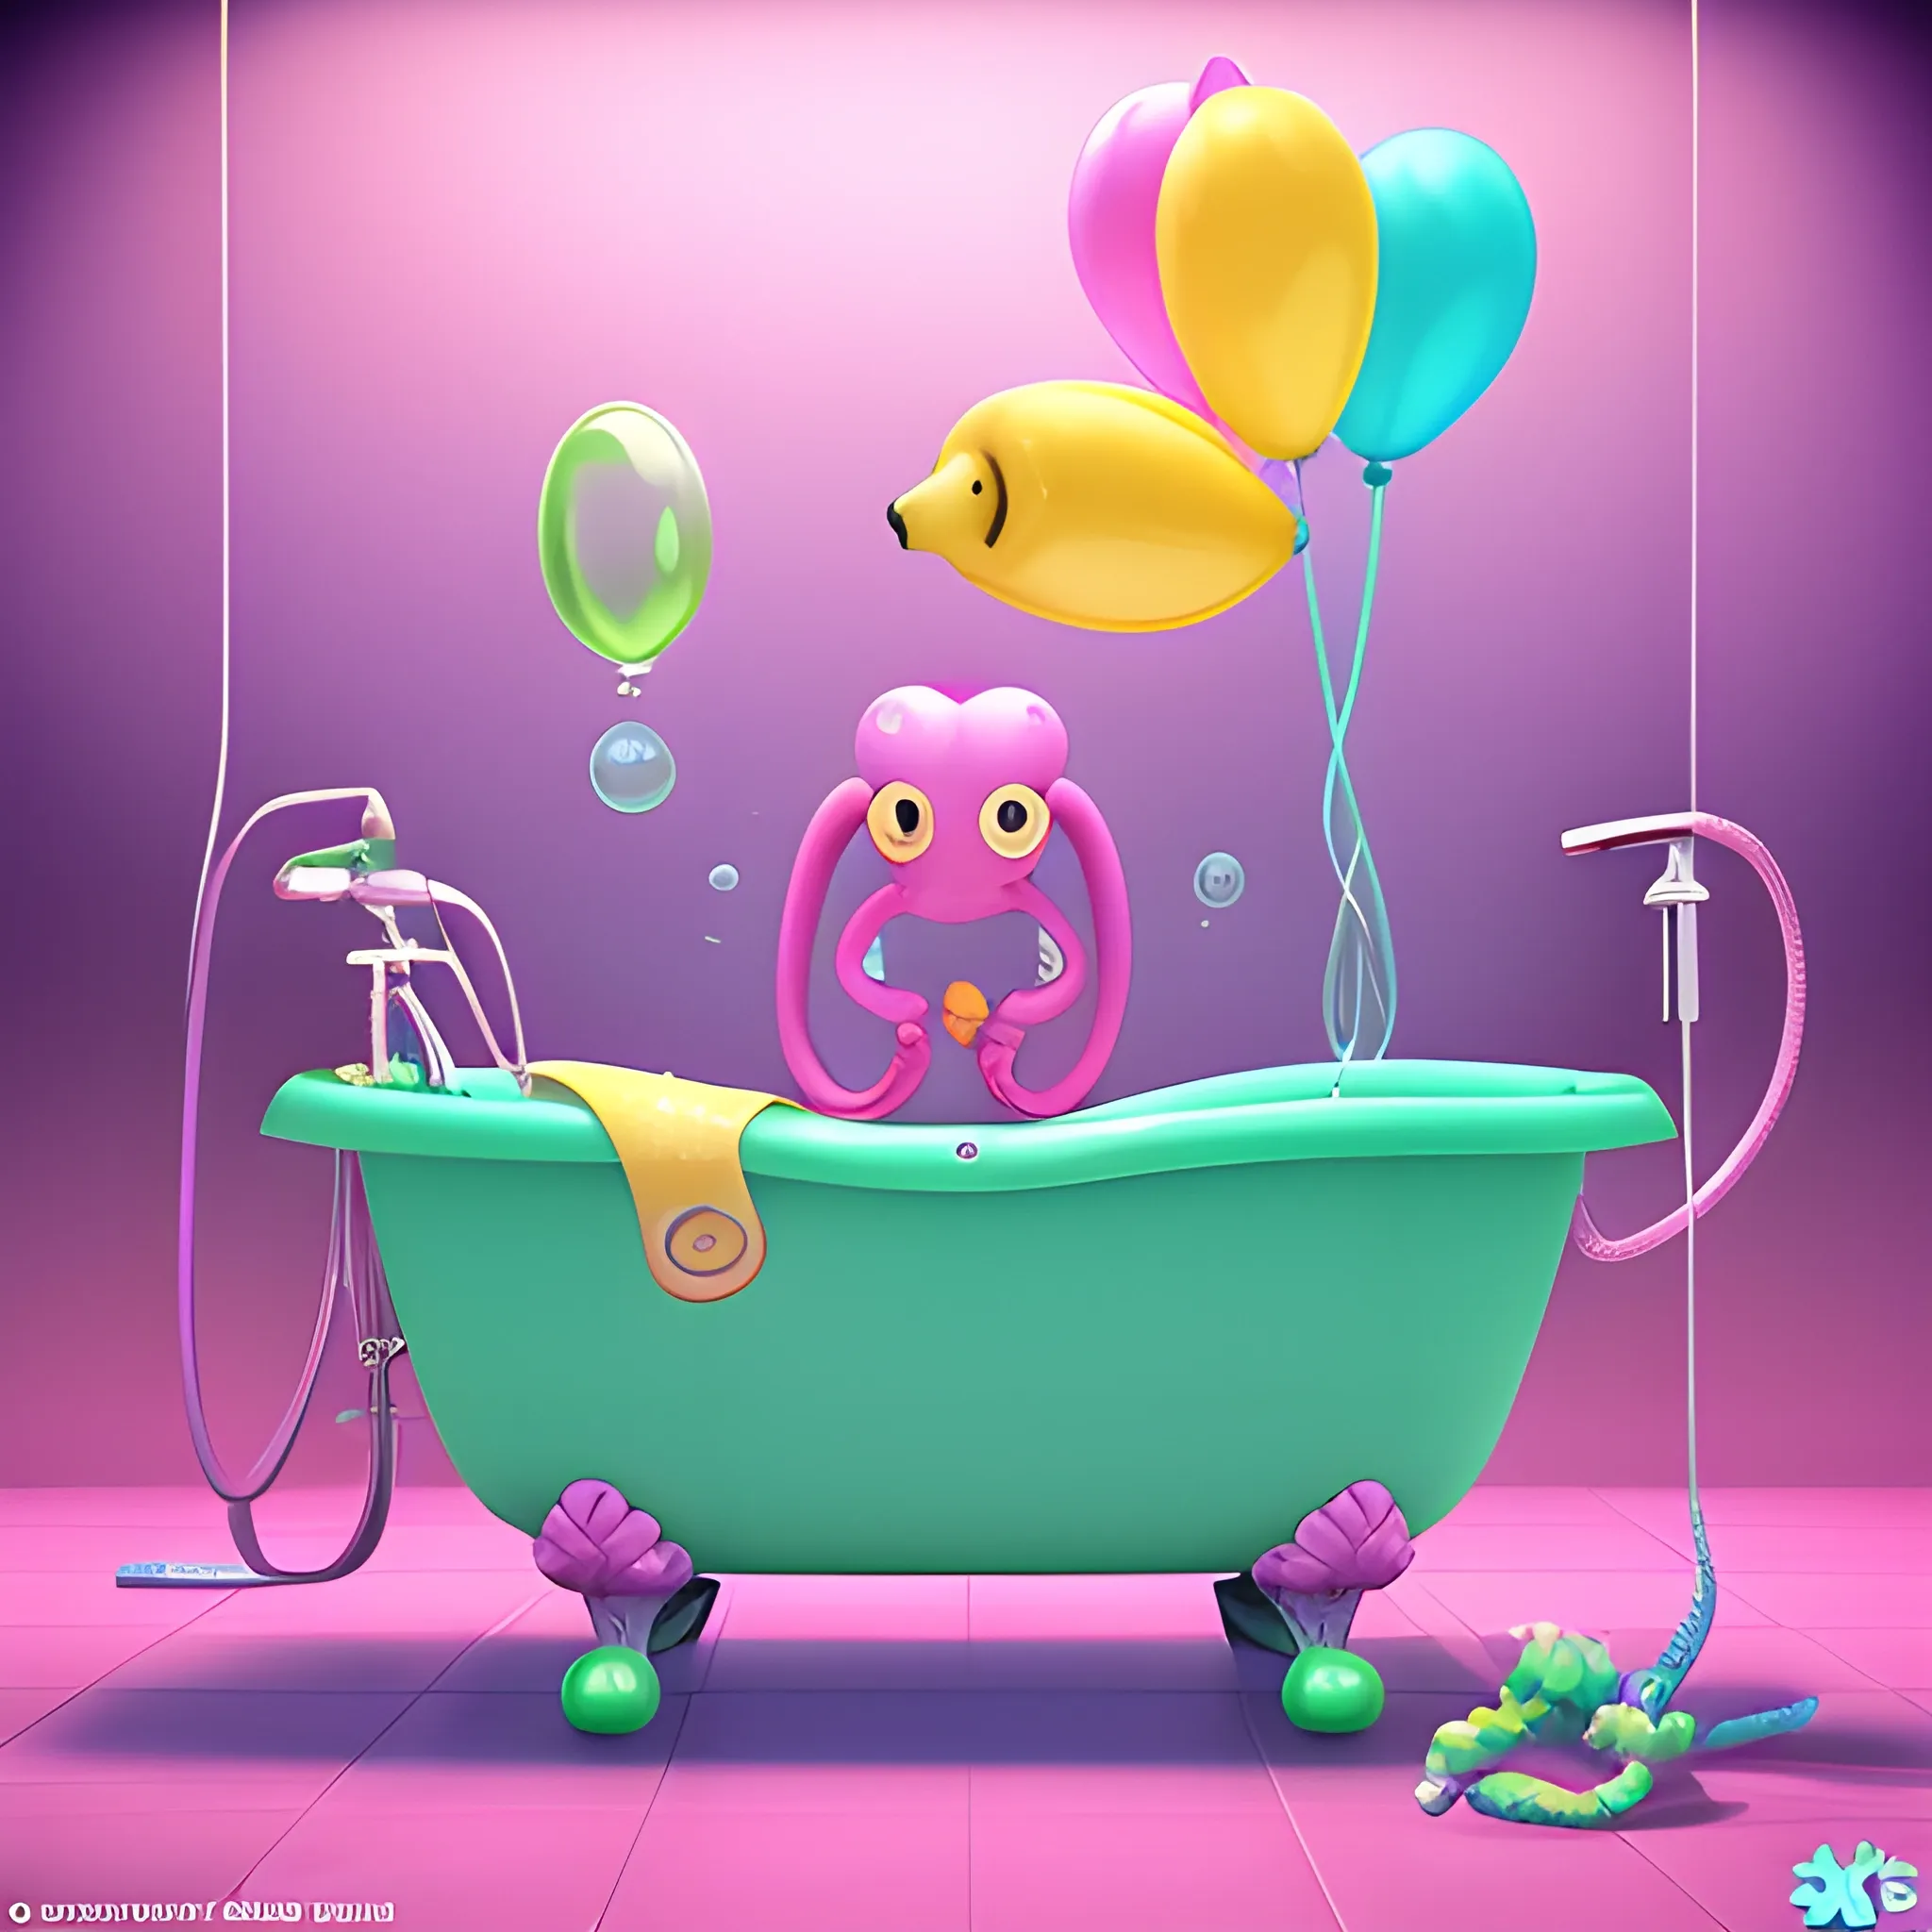 A banana looks like an octopus is relaxing into a bathtub, pink purple light blue and green bubbles, colorful balloons in the air, whimsical details, saturated colors, 3d Zbrush, CGI unreal engine, Cartoon